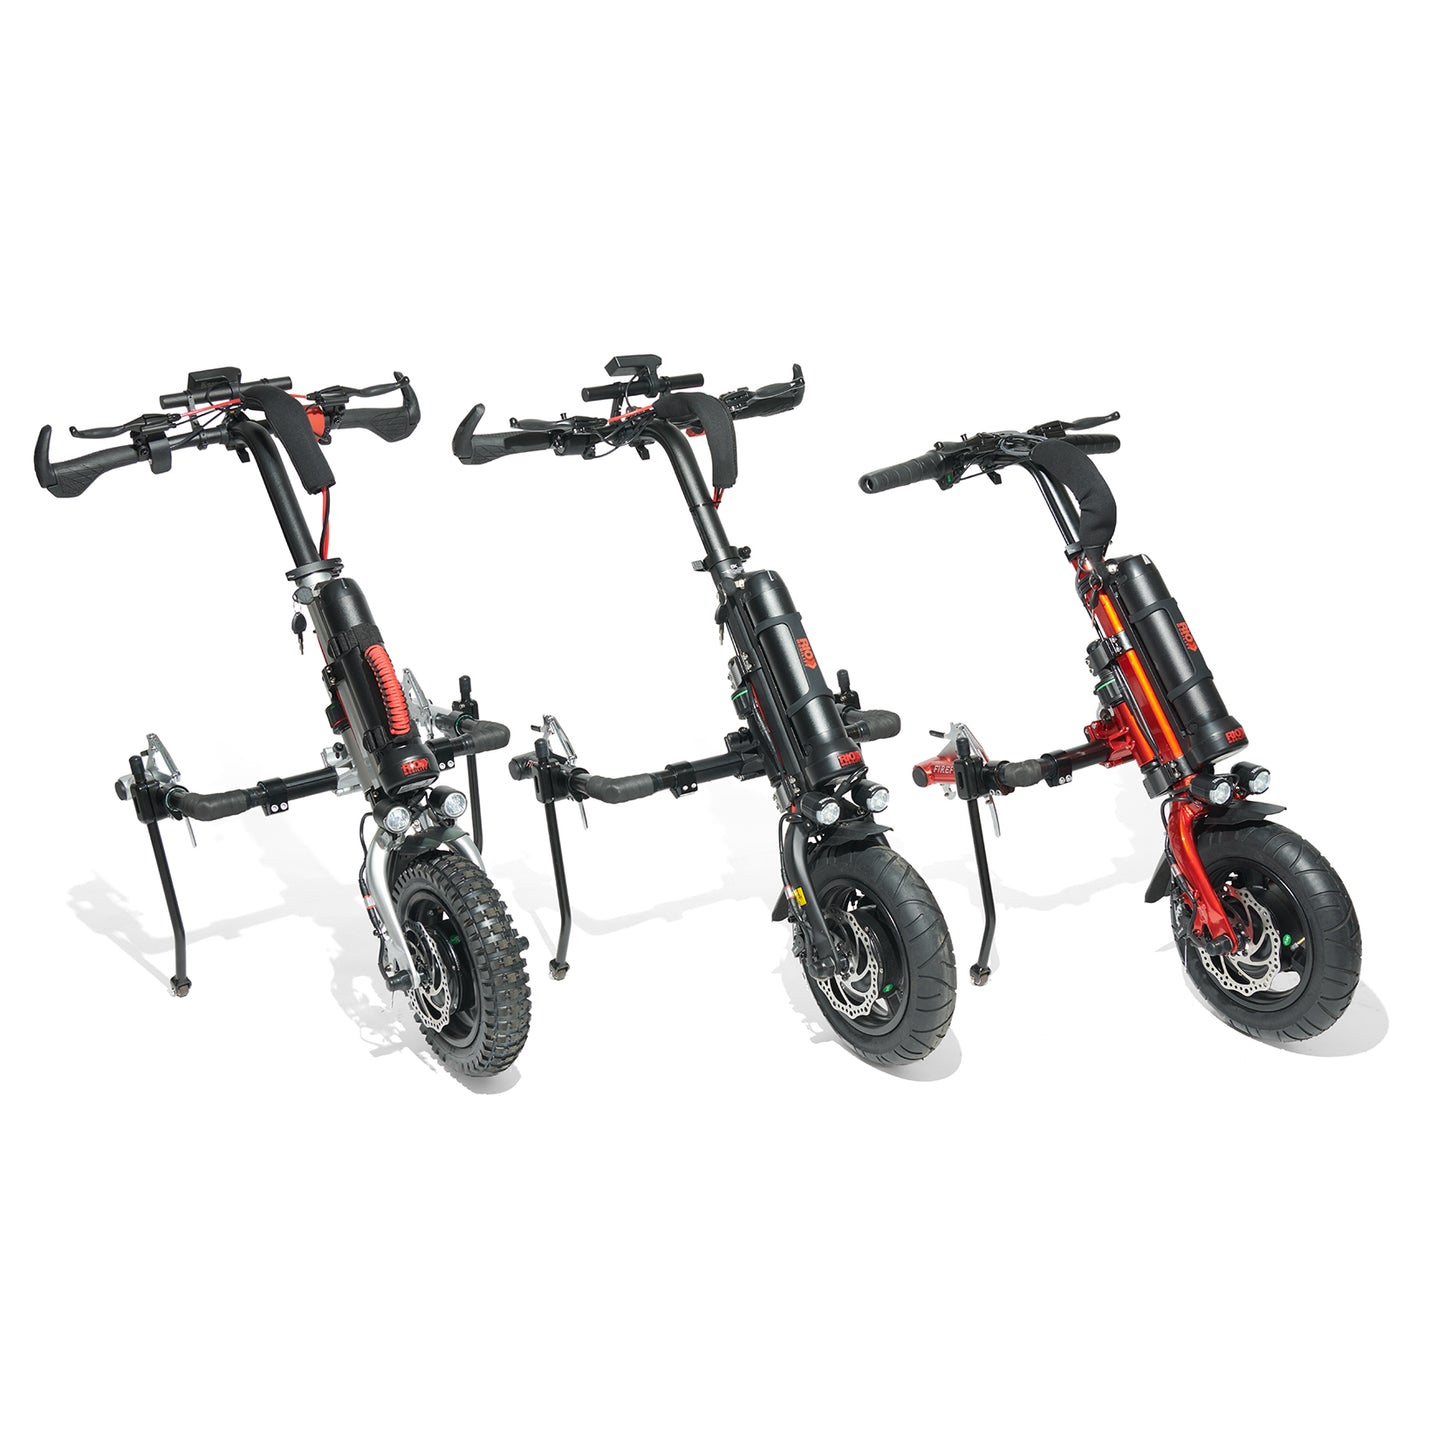 Three Electric Scooter Attachments